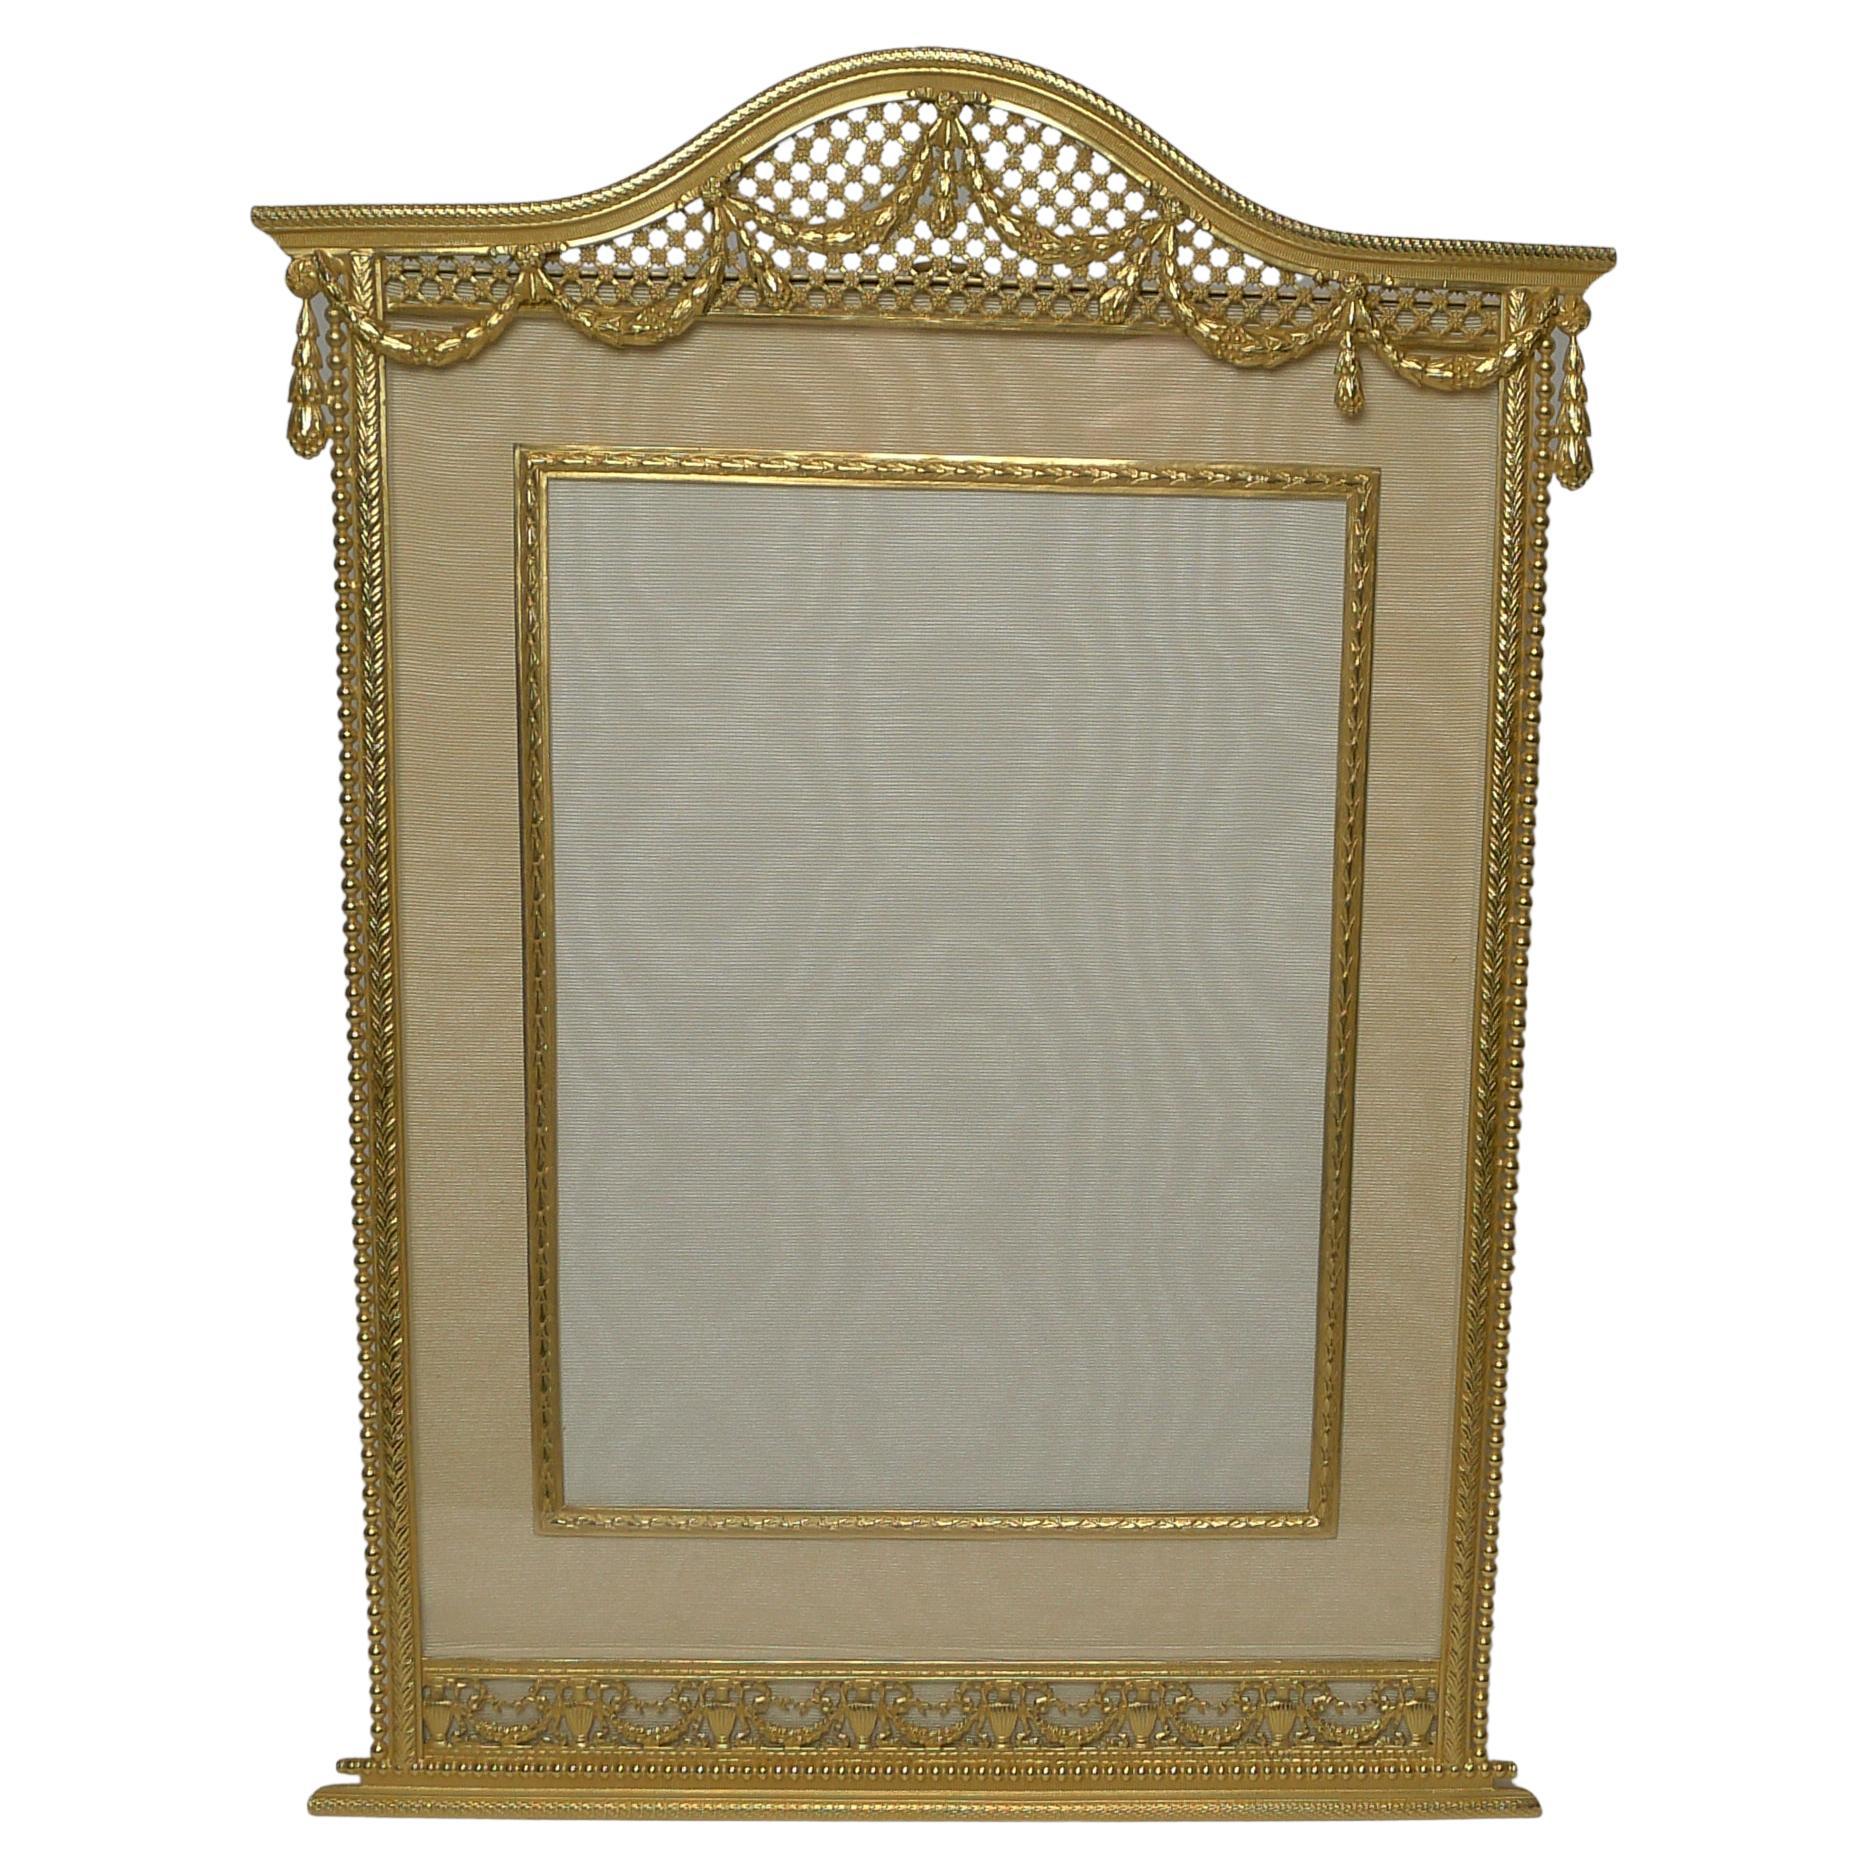 Grand Large Gilded Bronze Photograph / Picture Frame c.1910